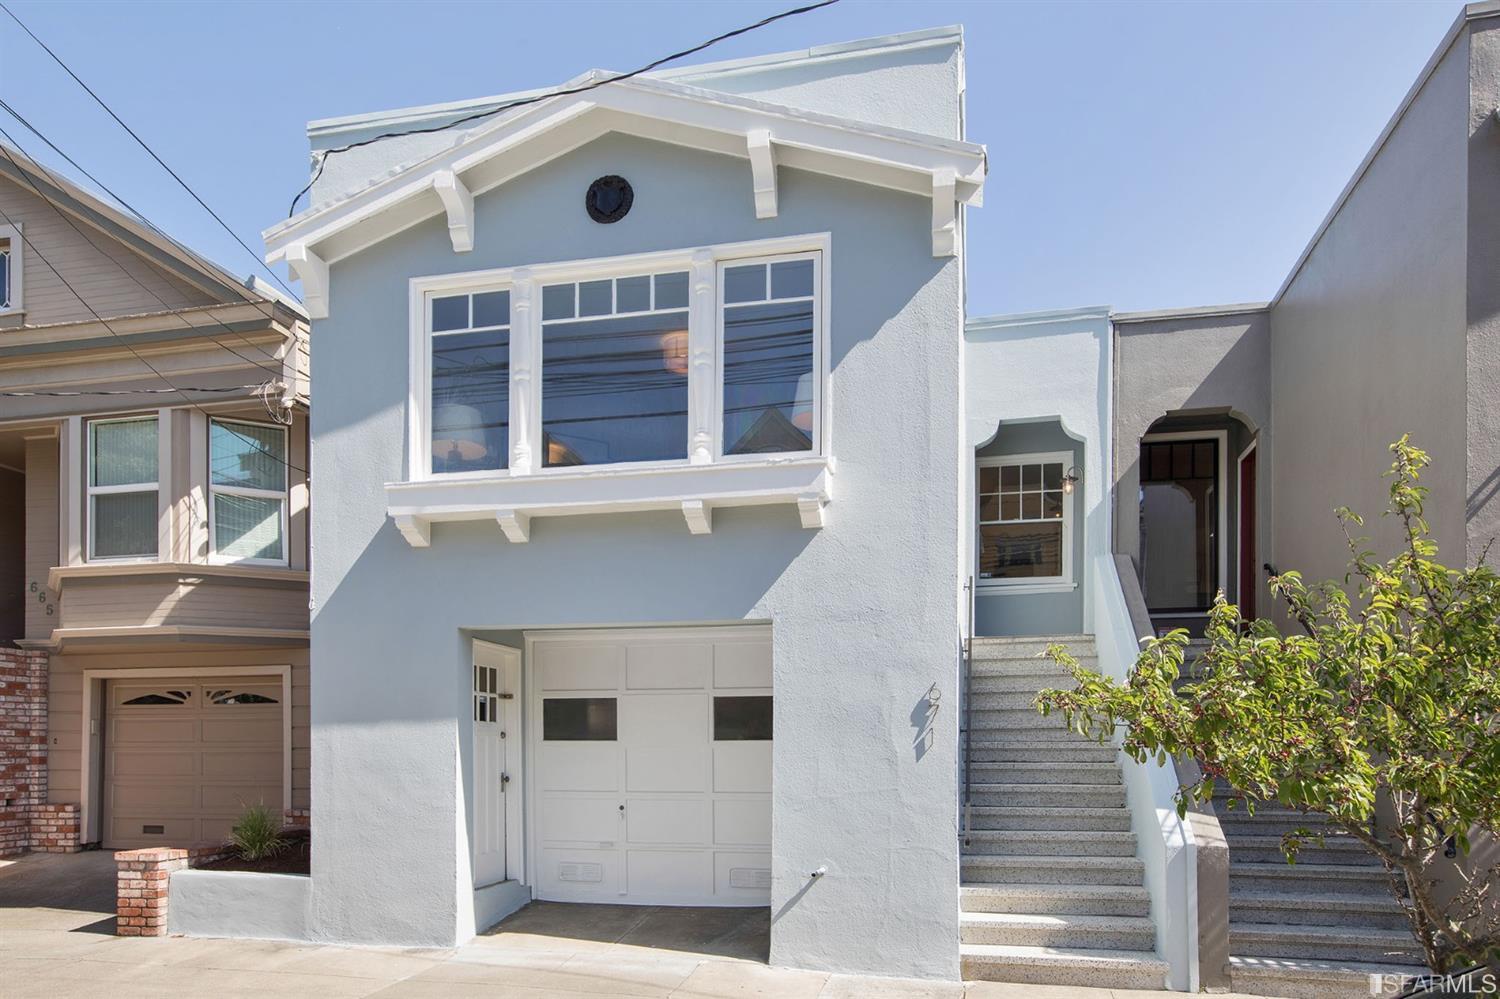 Feature photo for 4171 26th Street, San Francisco